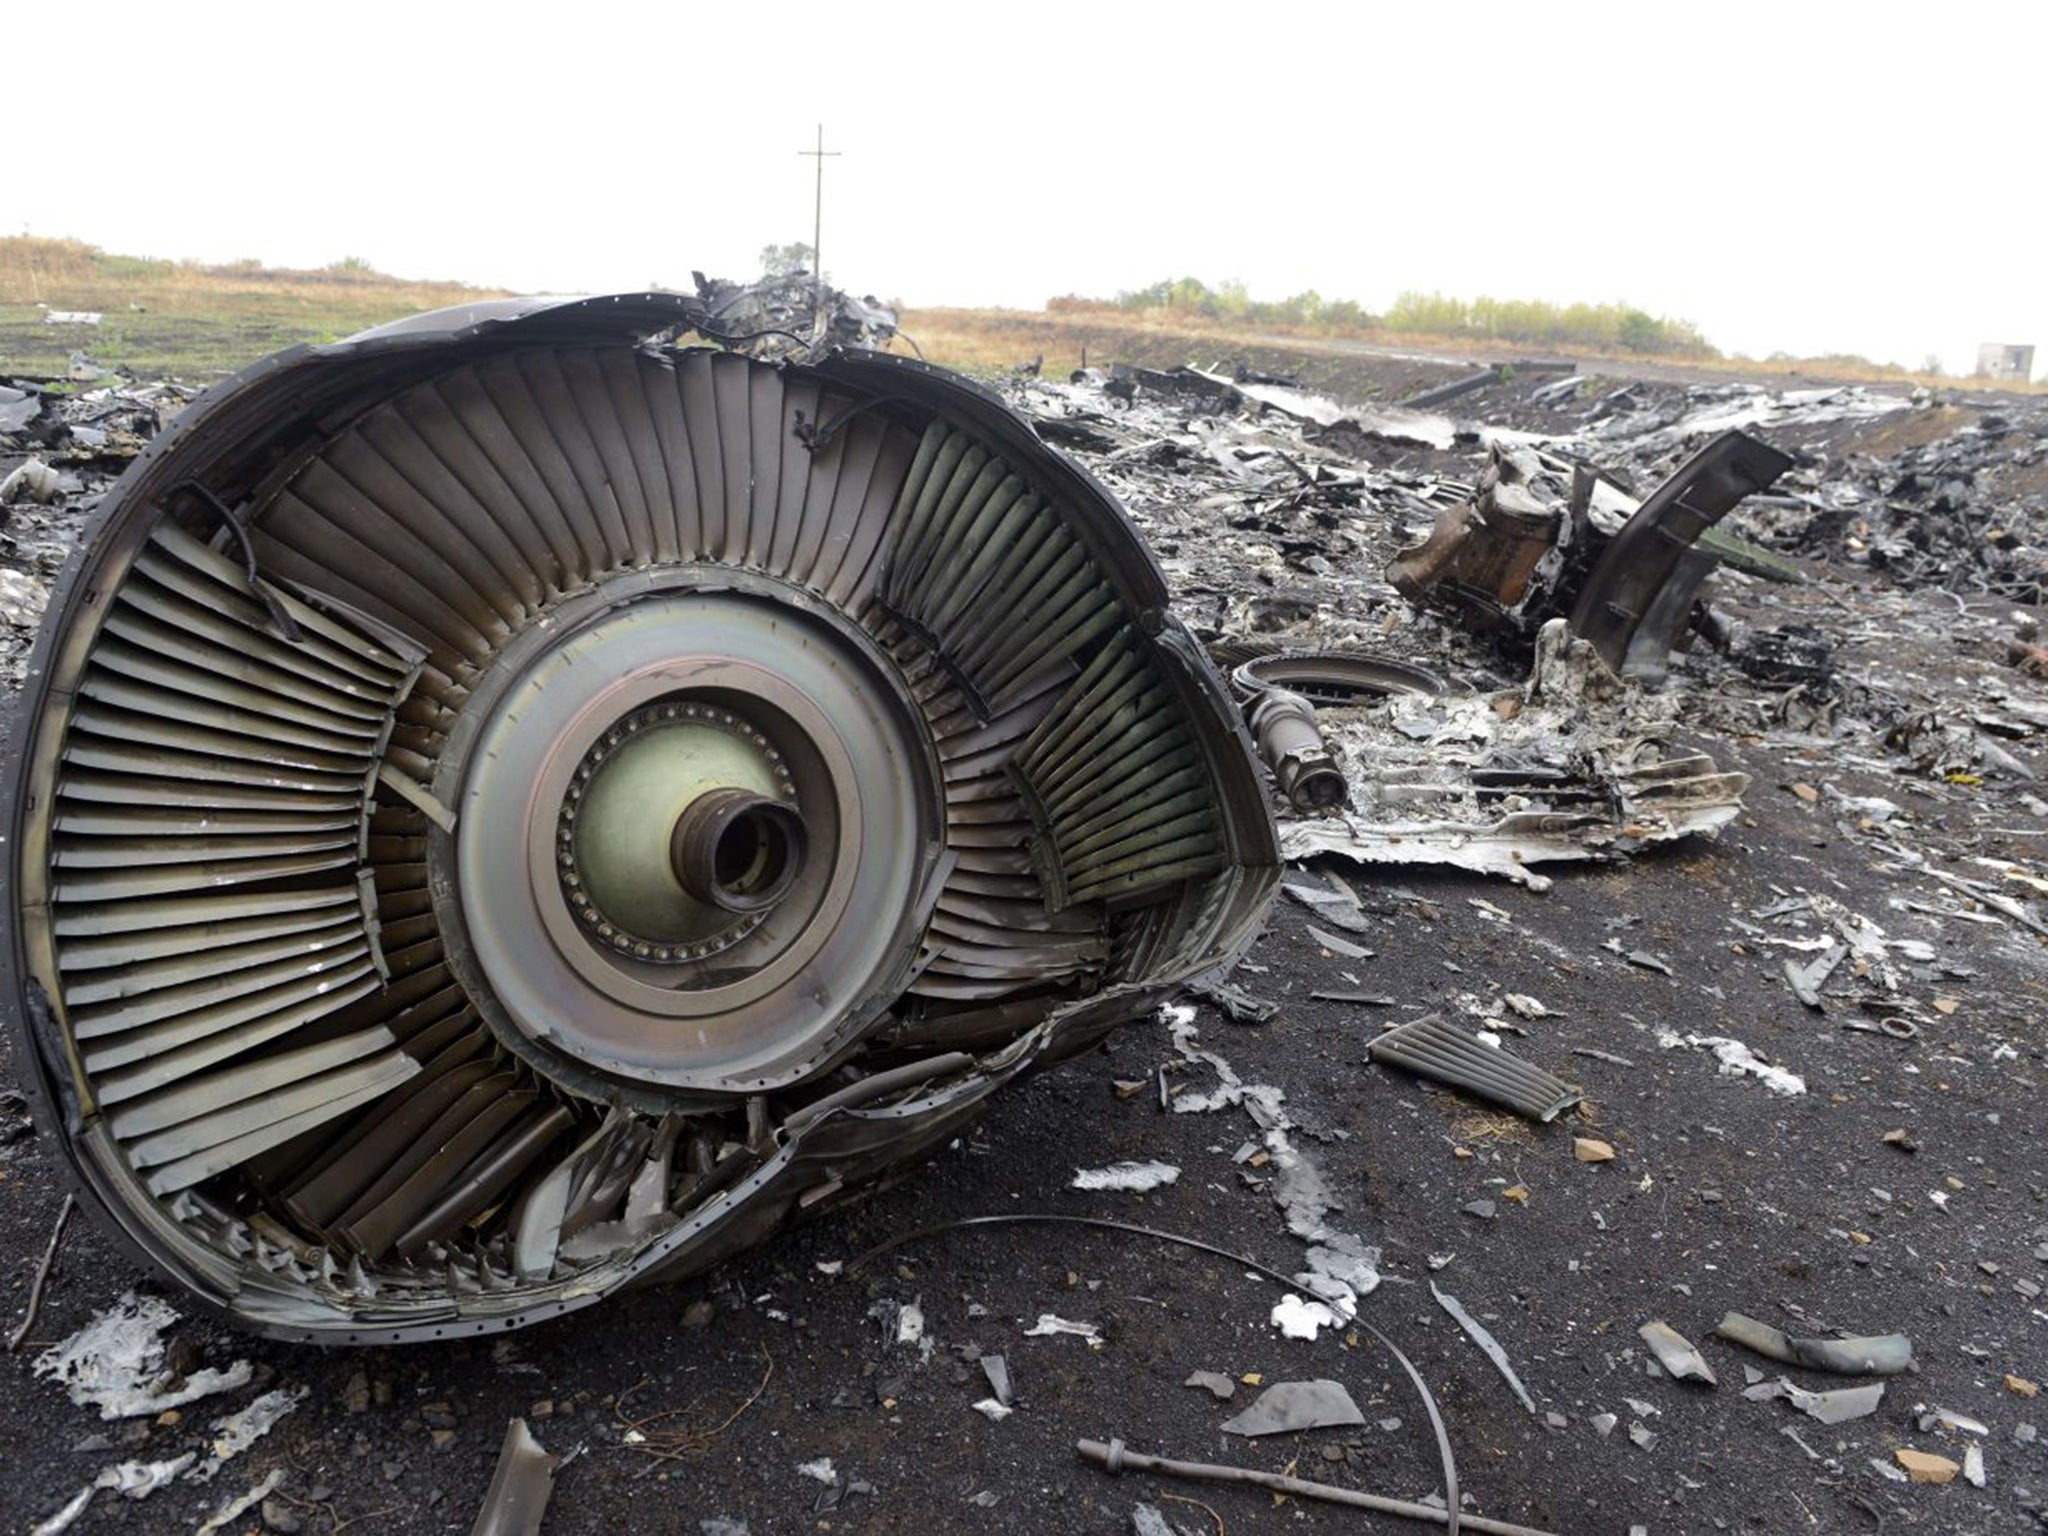 Part of the Malaysia Airlines Flight MH17 at the crash site in the village of Hrabove (Grabovo), some 80km east of the Ukranian city of Donetsk